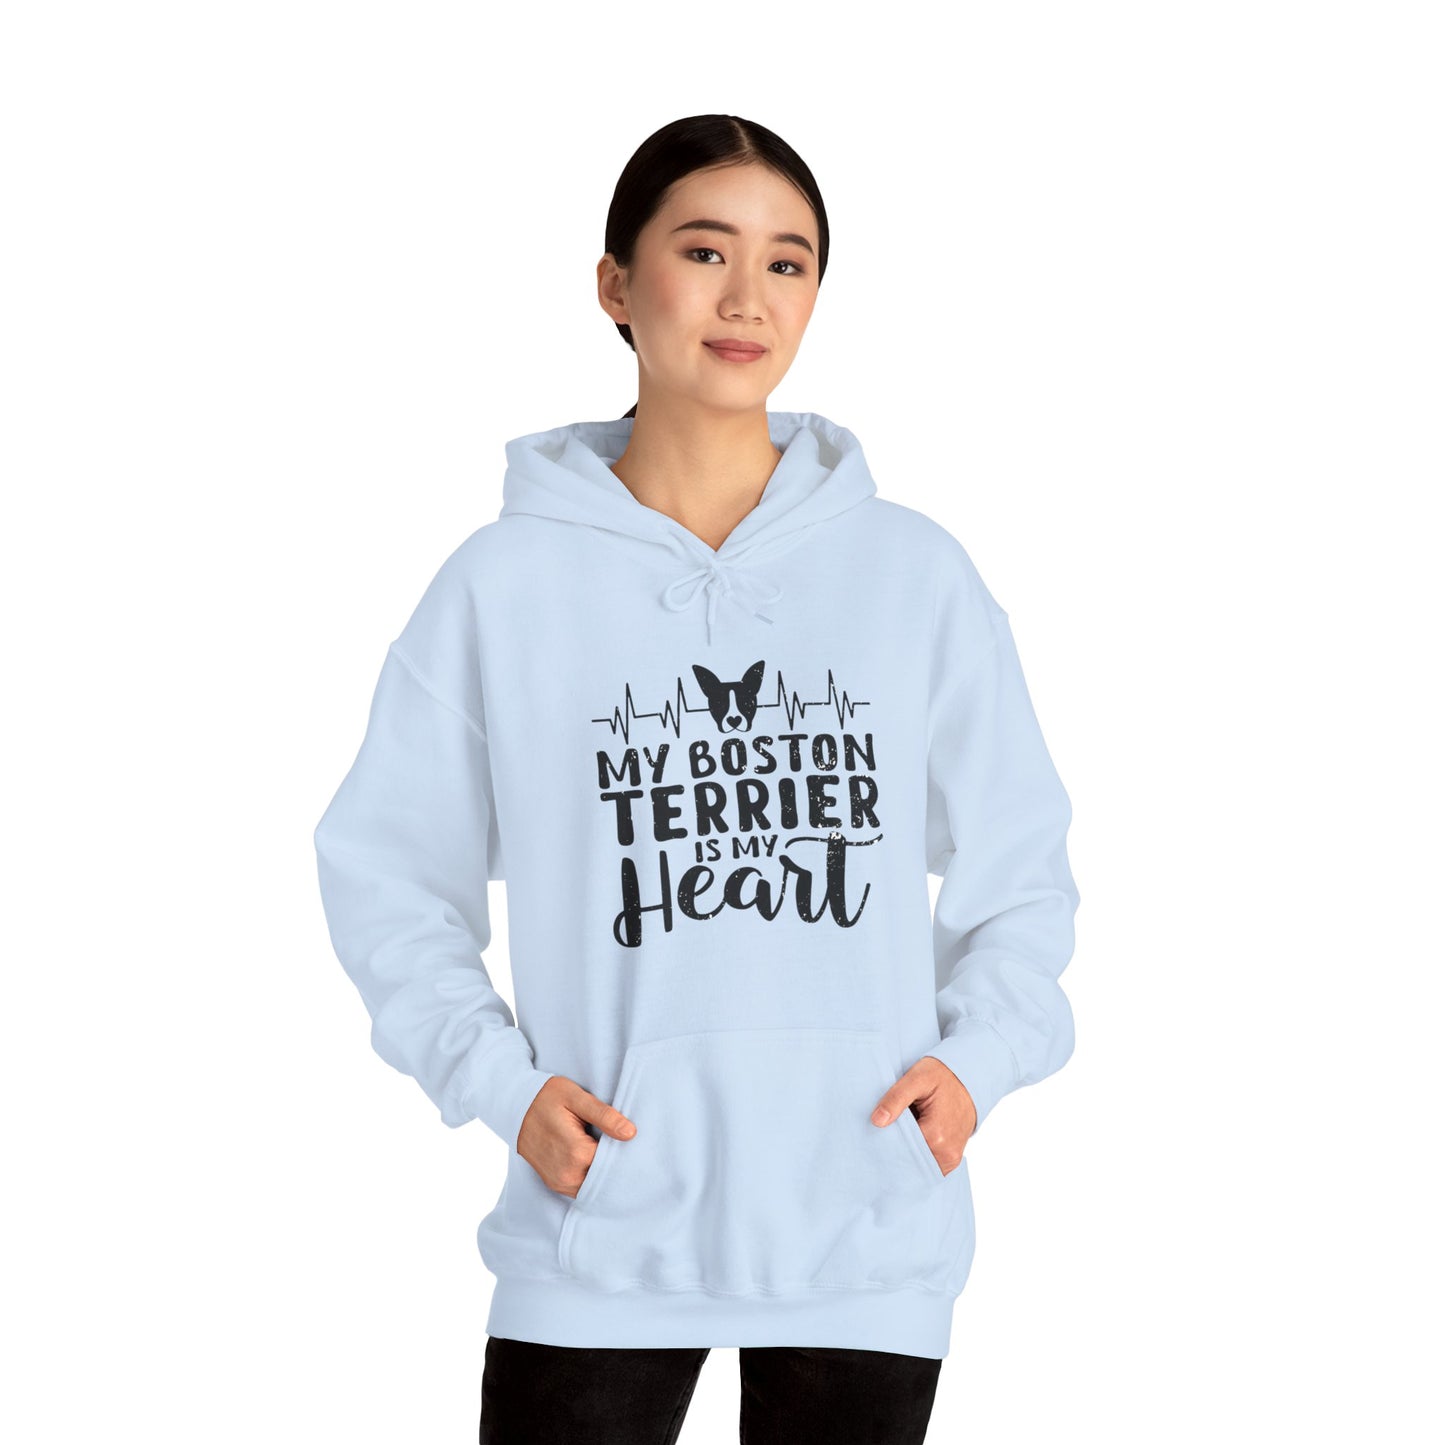 Rizzo  - Unisex Hoodie for Boston Terrier lovers